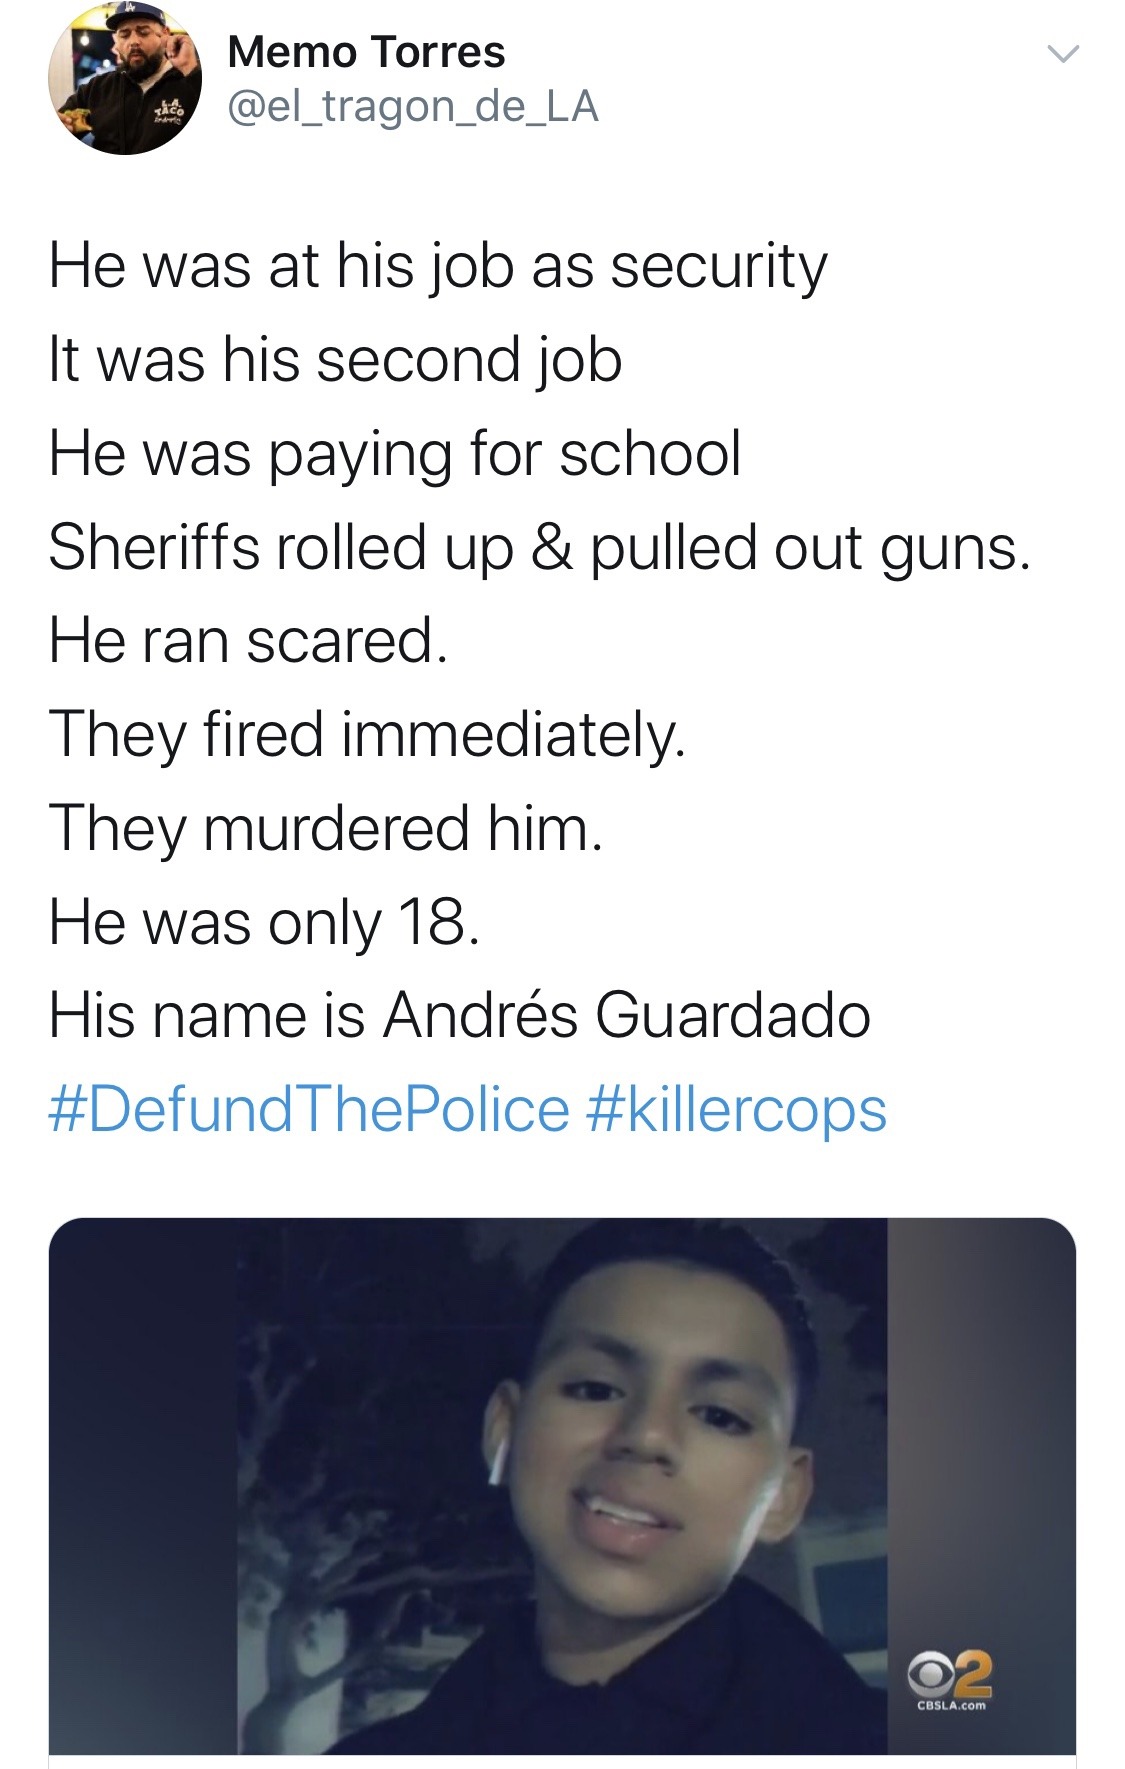 krxs100: Police officers shoot and kill Kid in Los Angeles: ‘He ran because he was scared’   Andrew Heney, owner of the Freeway autoshop, told a local CBS affiliate: “We had a security guard that was out front, because we had just had certain issues